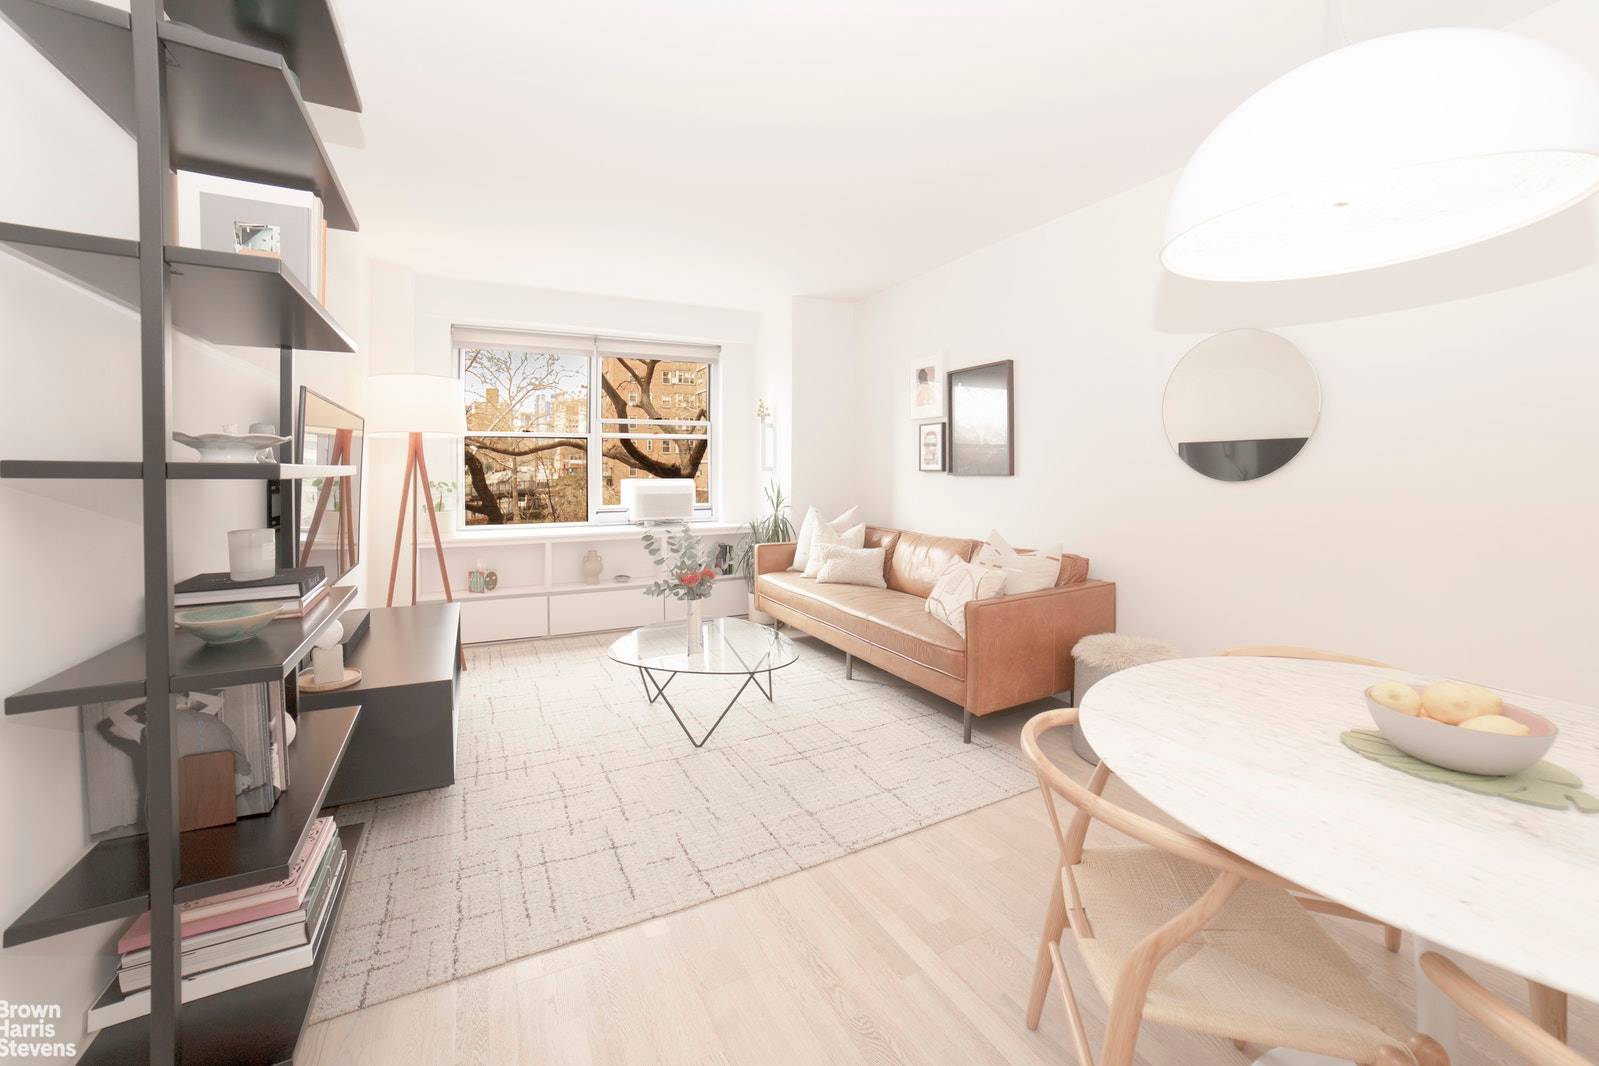 A gut renovated 1 bedroom like none other you have seen in this coop.